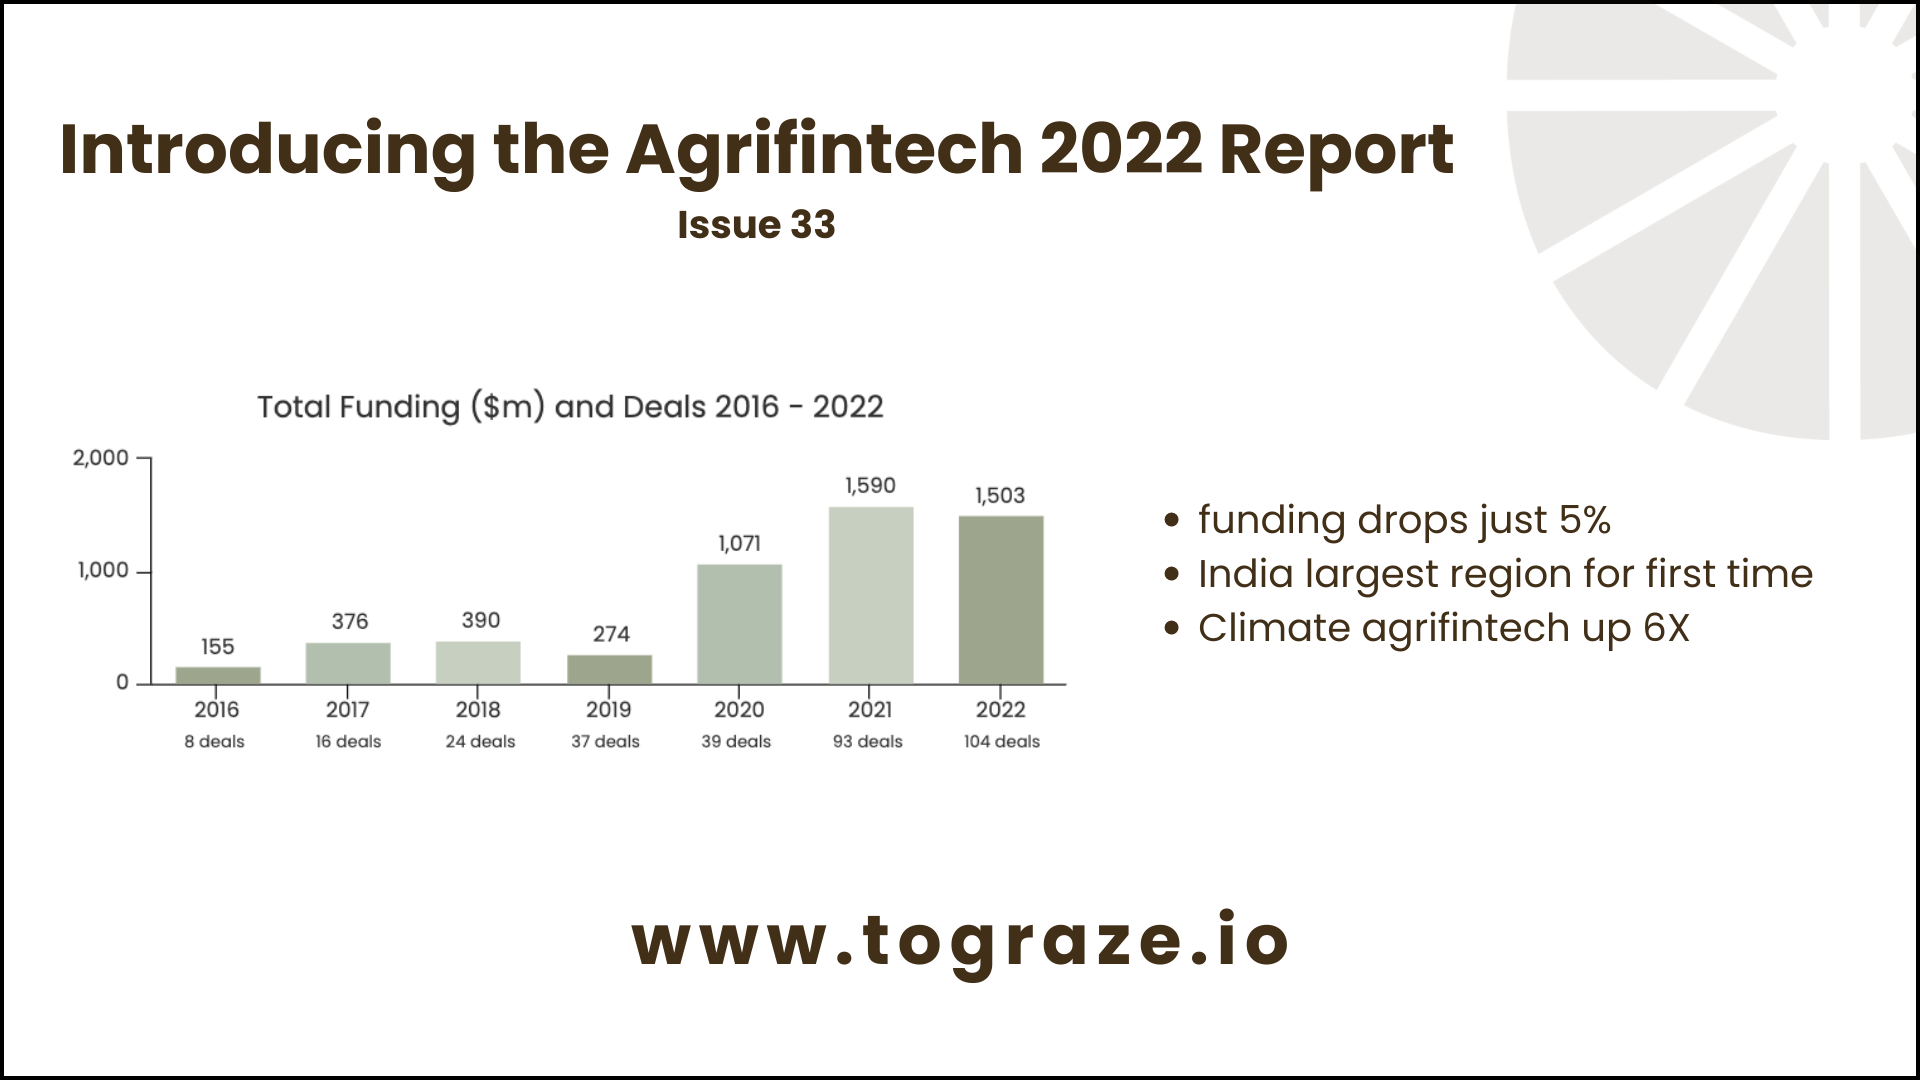 Introducing the Agrifintech 2022 report